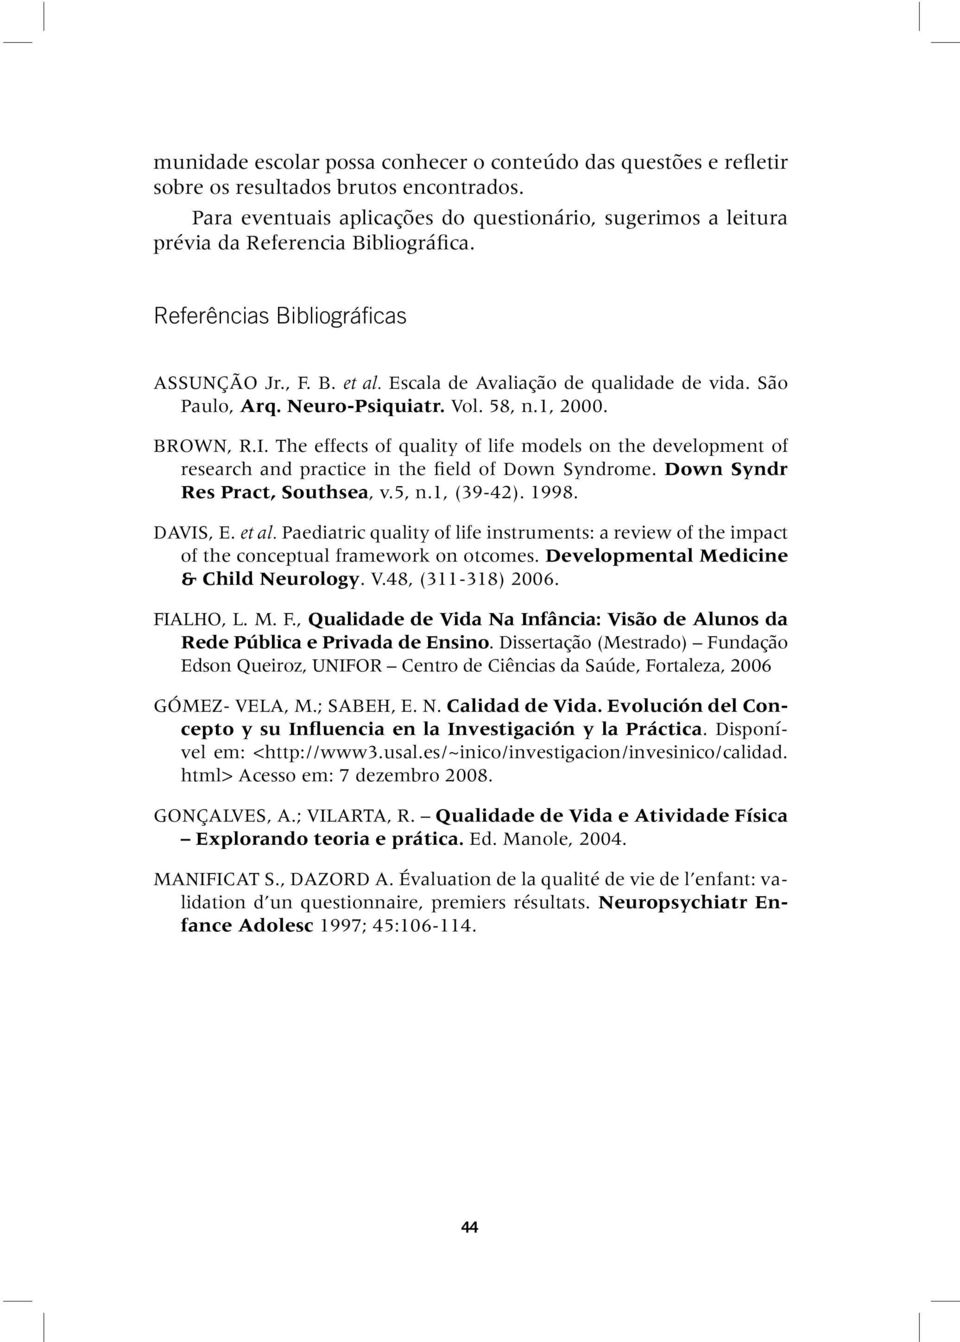 São Paulo, Arq. Neuro-Psiquiatr. Vol. 58, n.1, 2000. BROWN, R.I. The effects of quality of life models on the development of research and practice in the field of Down Syndrome.